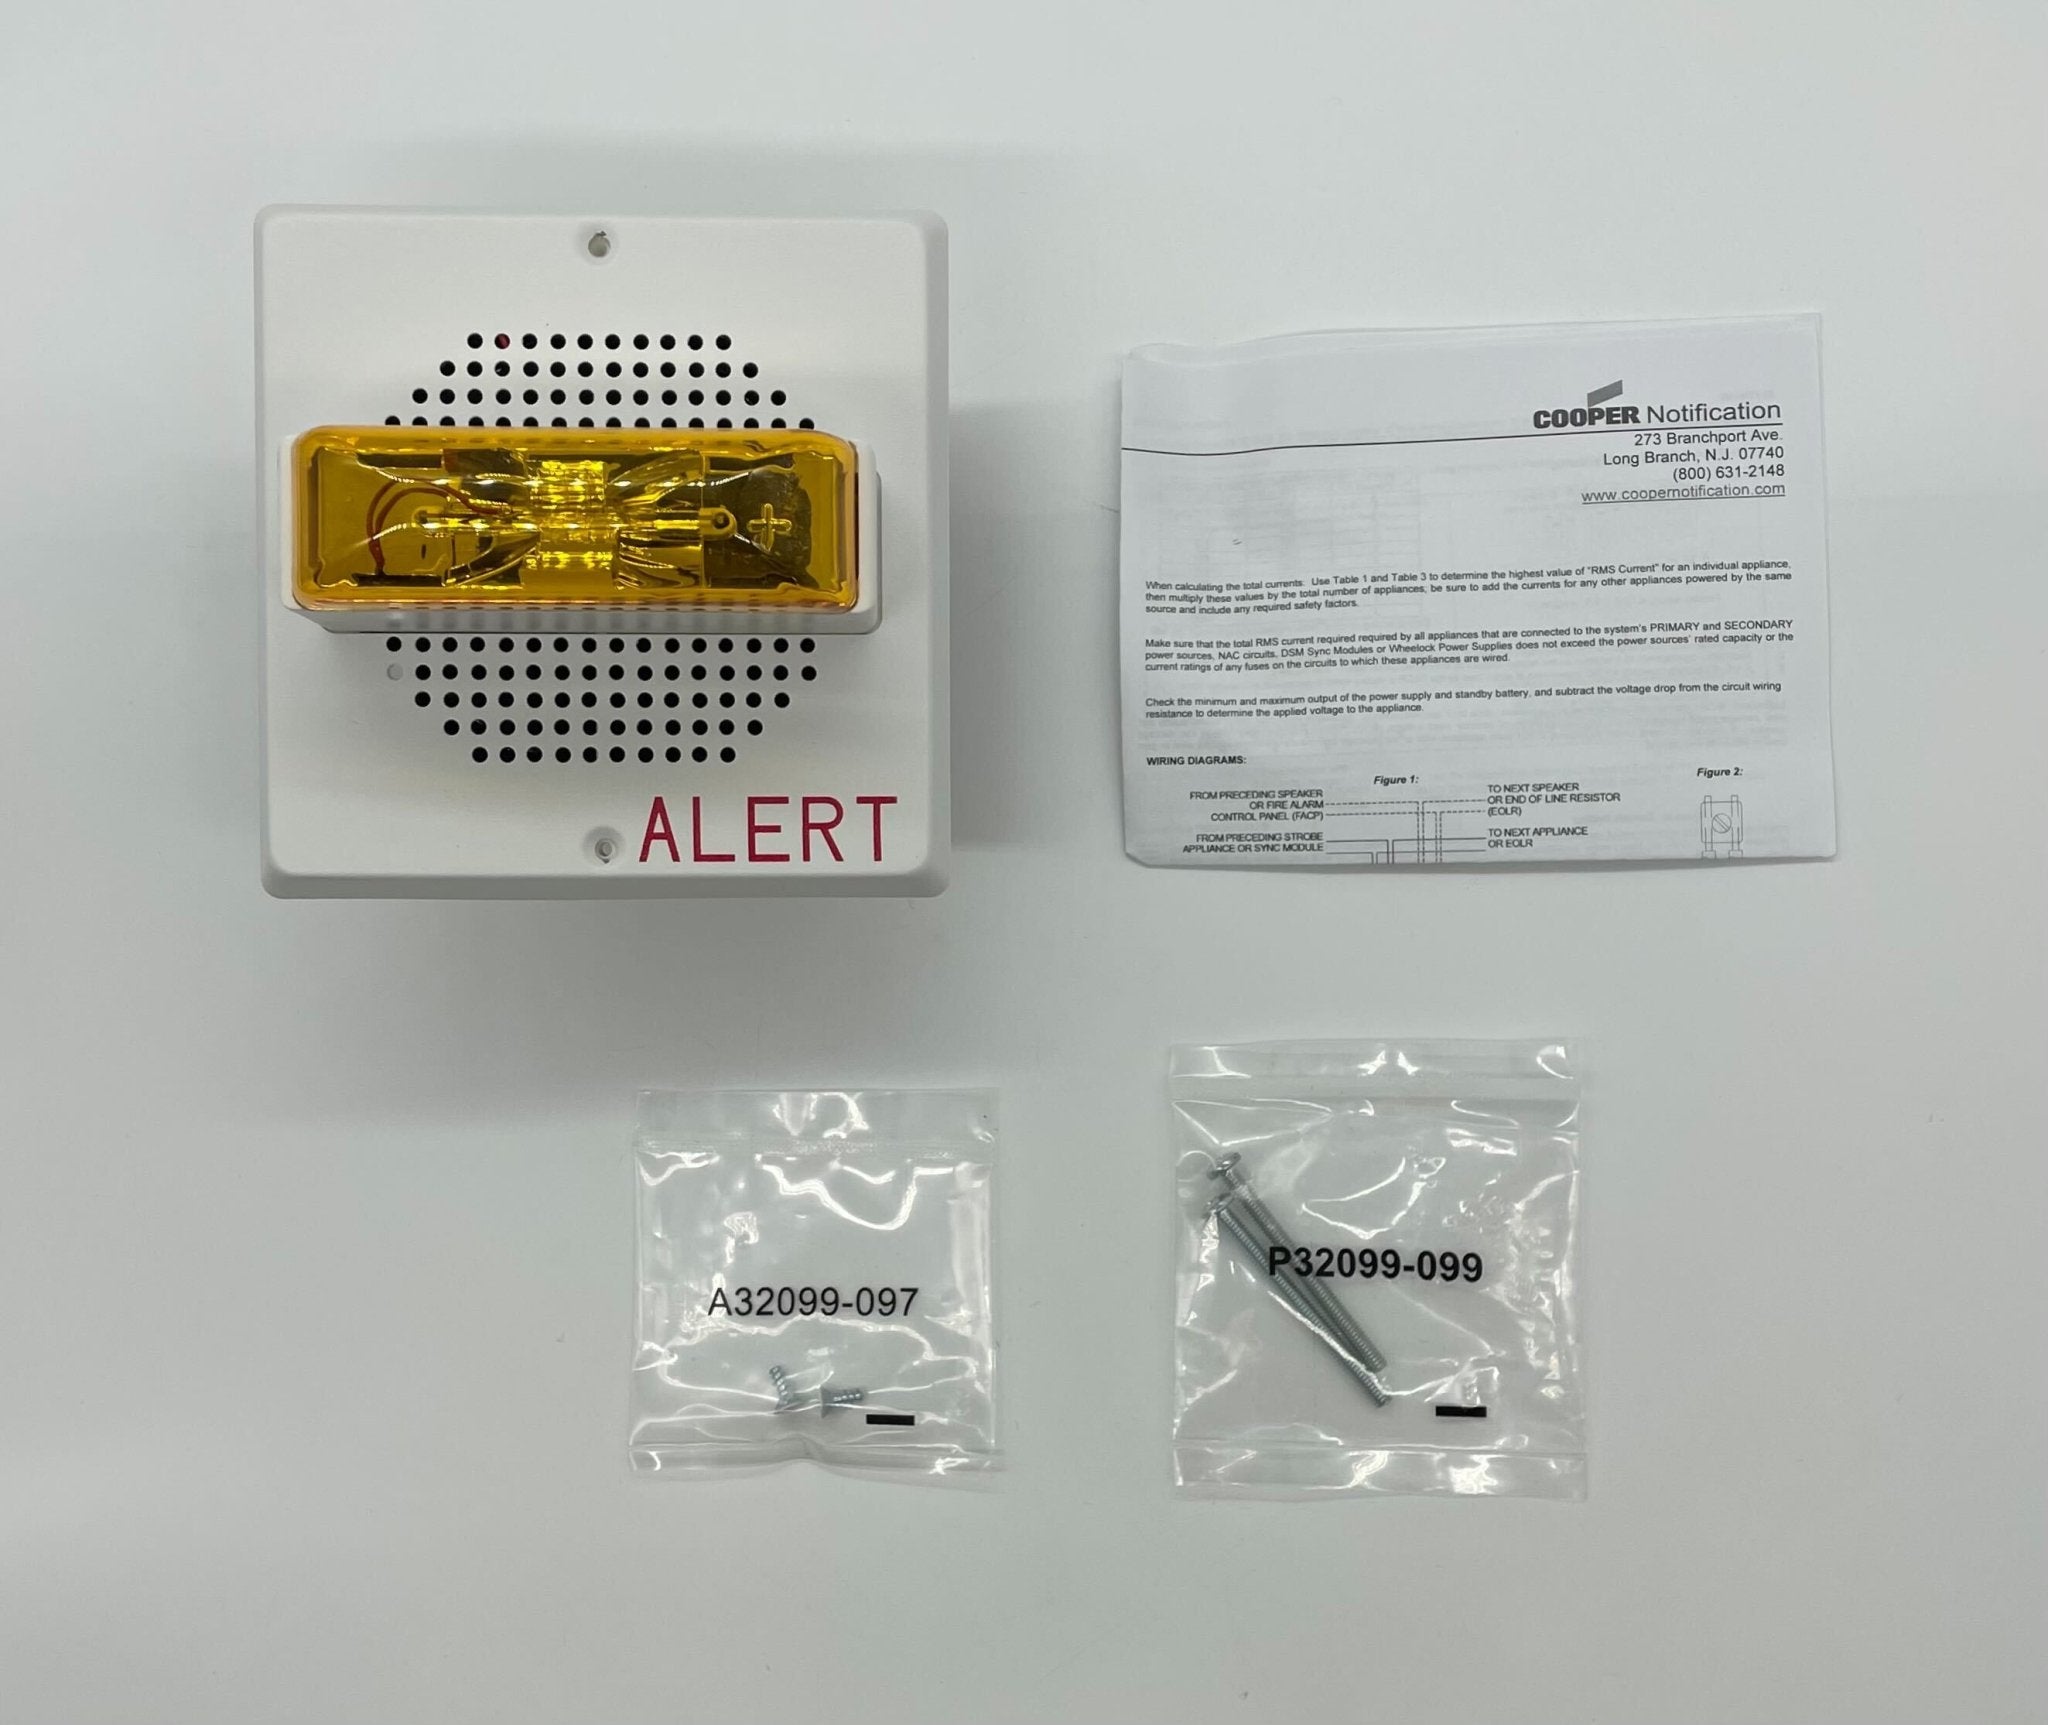 Wheelock ET70A-24MCW-ALW - The Fire Alarm Supplier